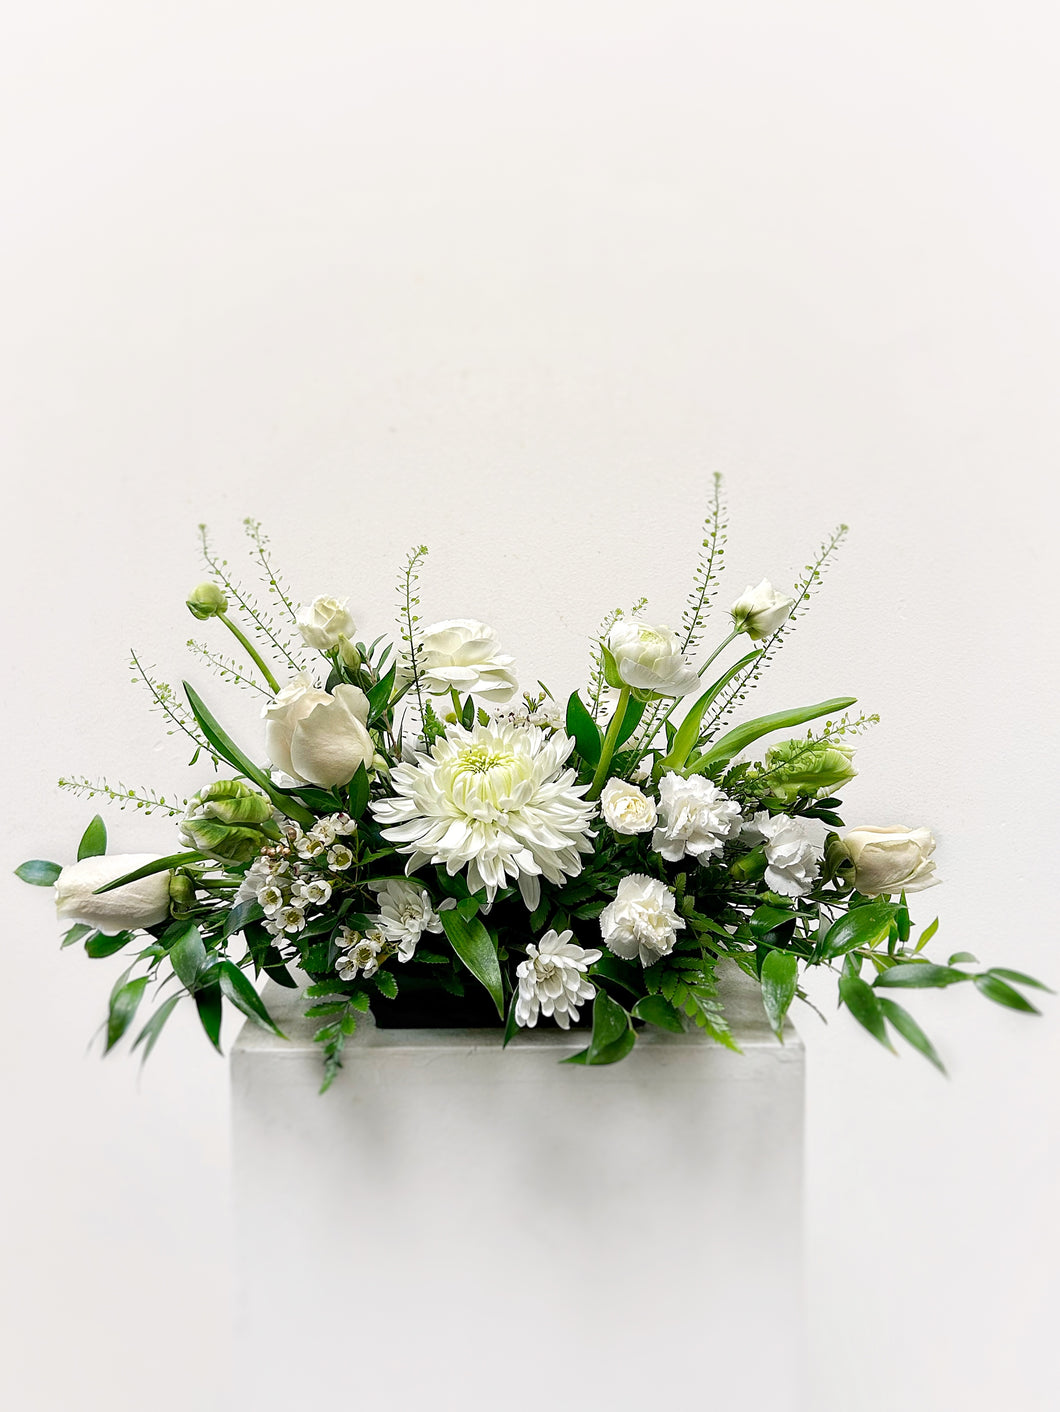 Classic White Centerpiece - Long and low